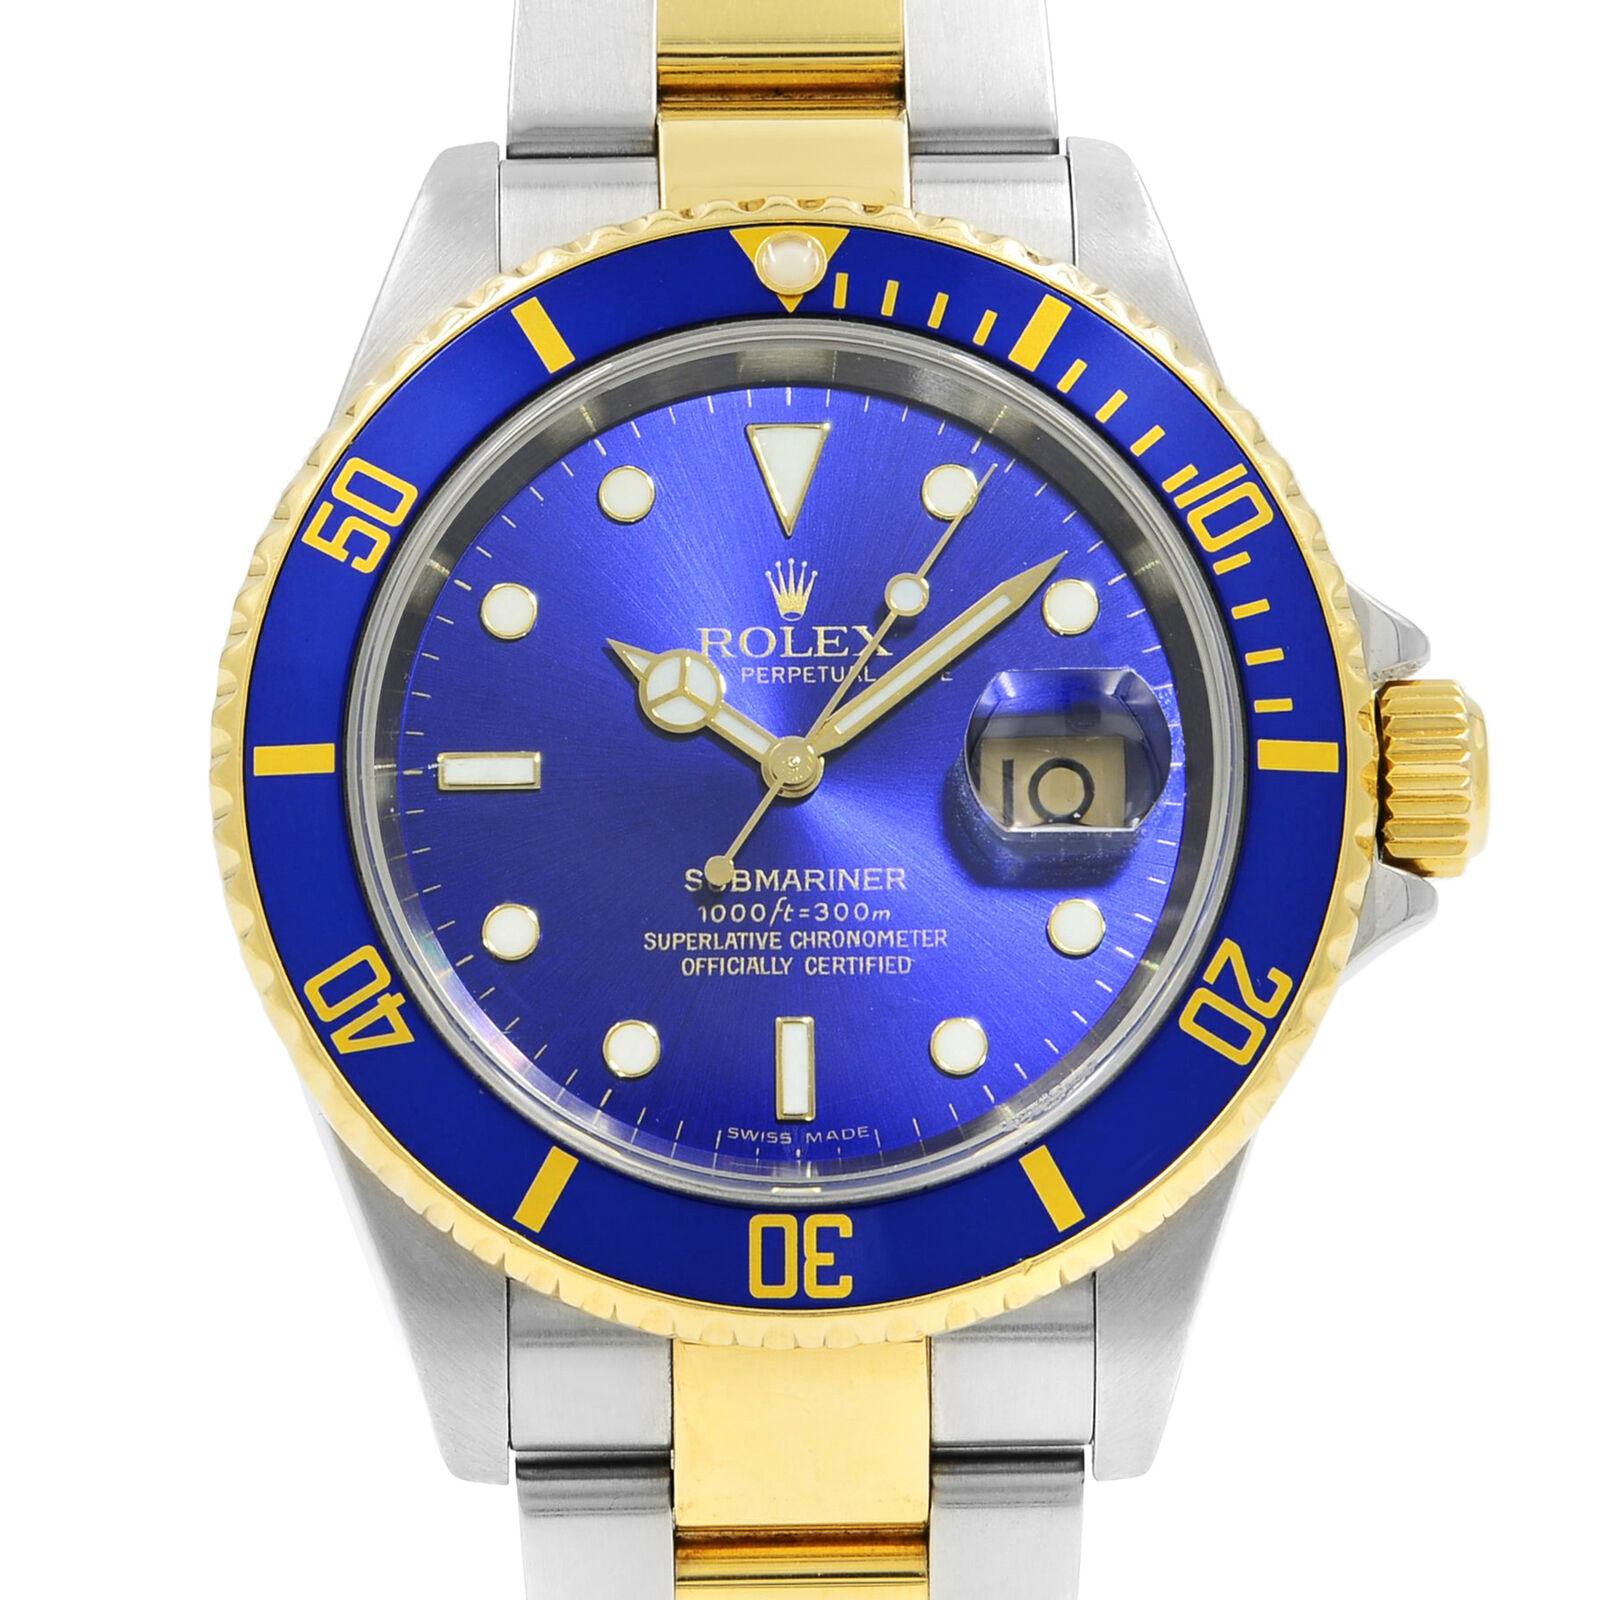 This pre-owned Rolex Submariner 16613 is a beautiful men's timepiece that is powered by an automatic movement which is cased in a stainless steel case. It has a round shape face, date dial, and has hand sticks & dots style markers. It is completed